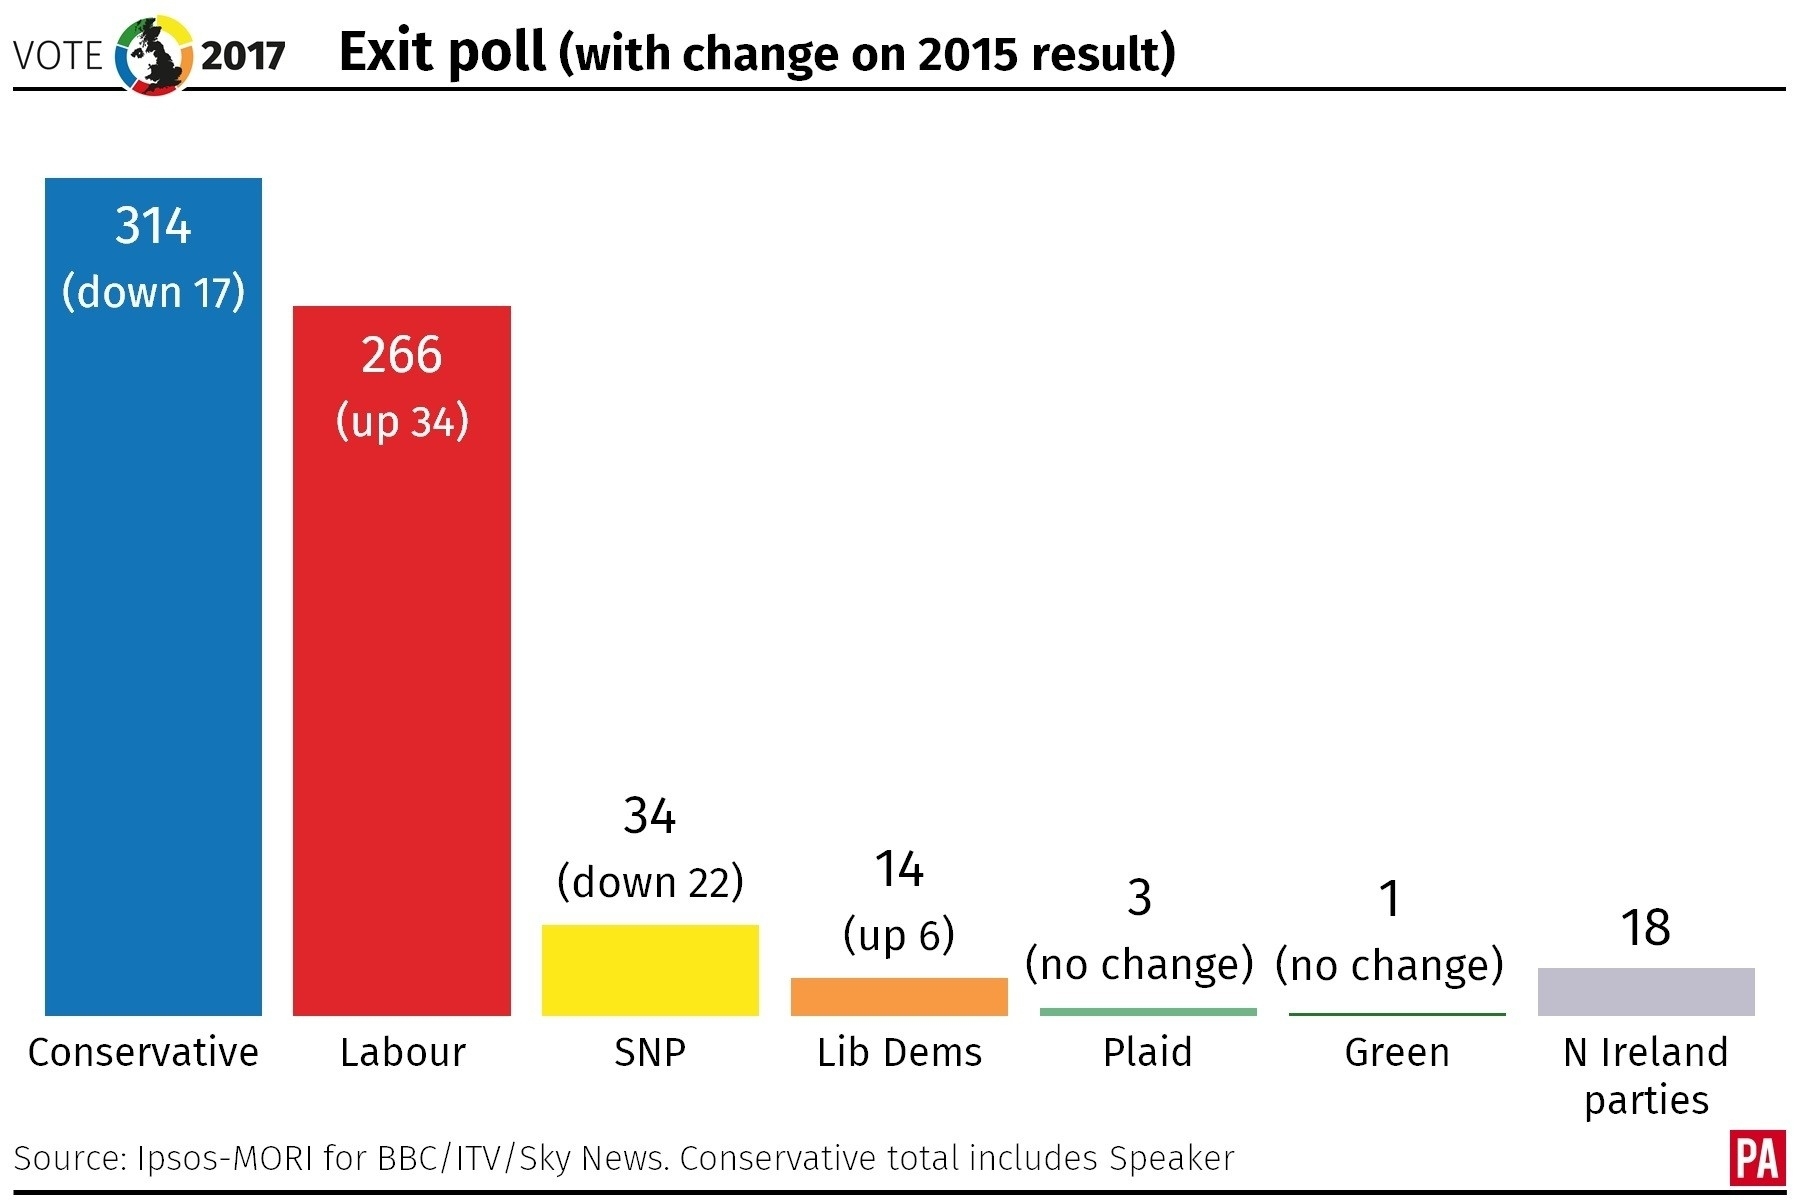 Exit poll for the 2017 general election.